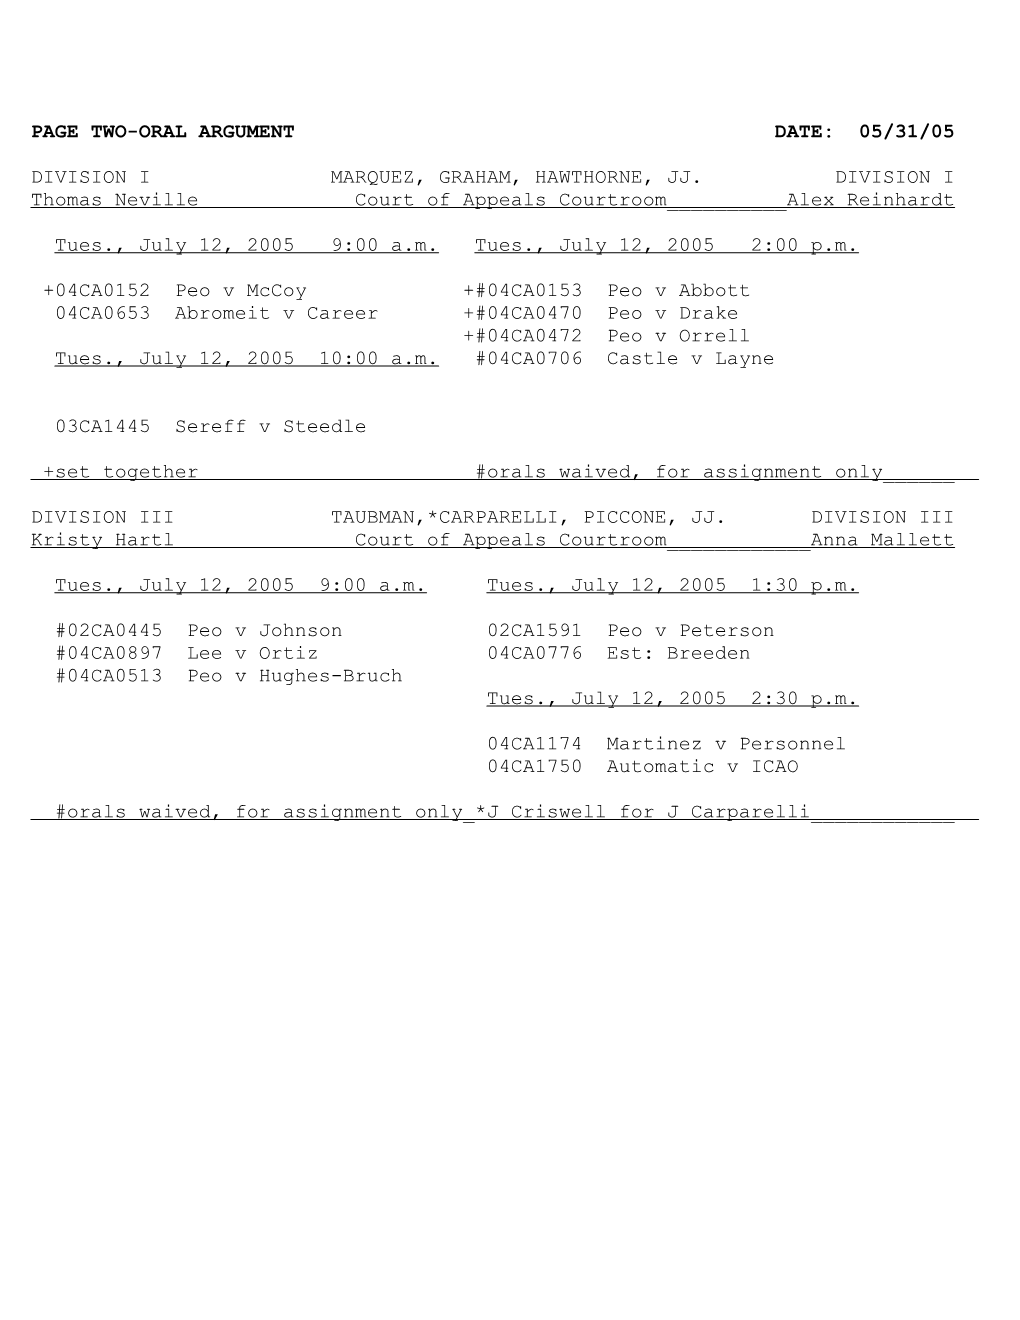 Page One-Oral Argument Date: 05/26/05